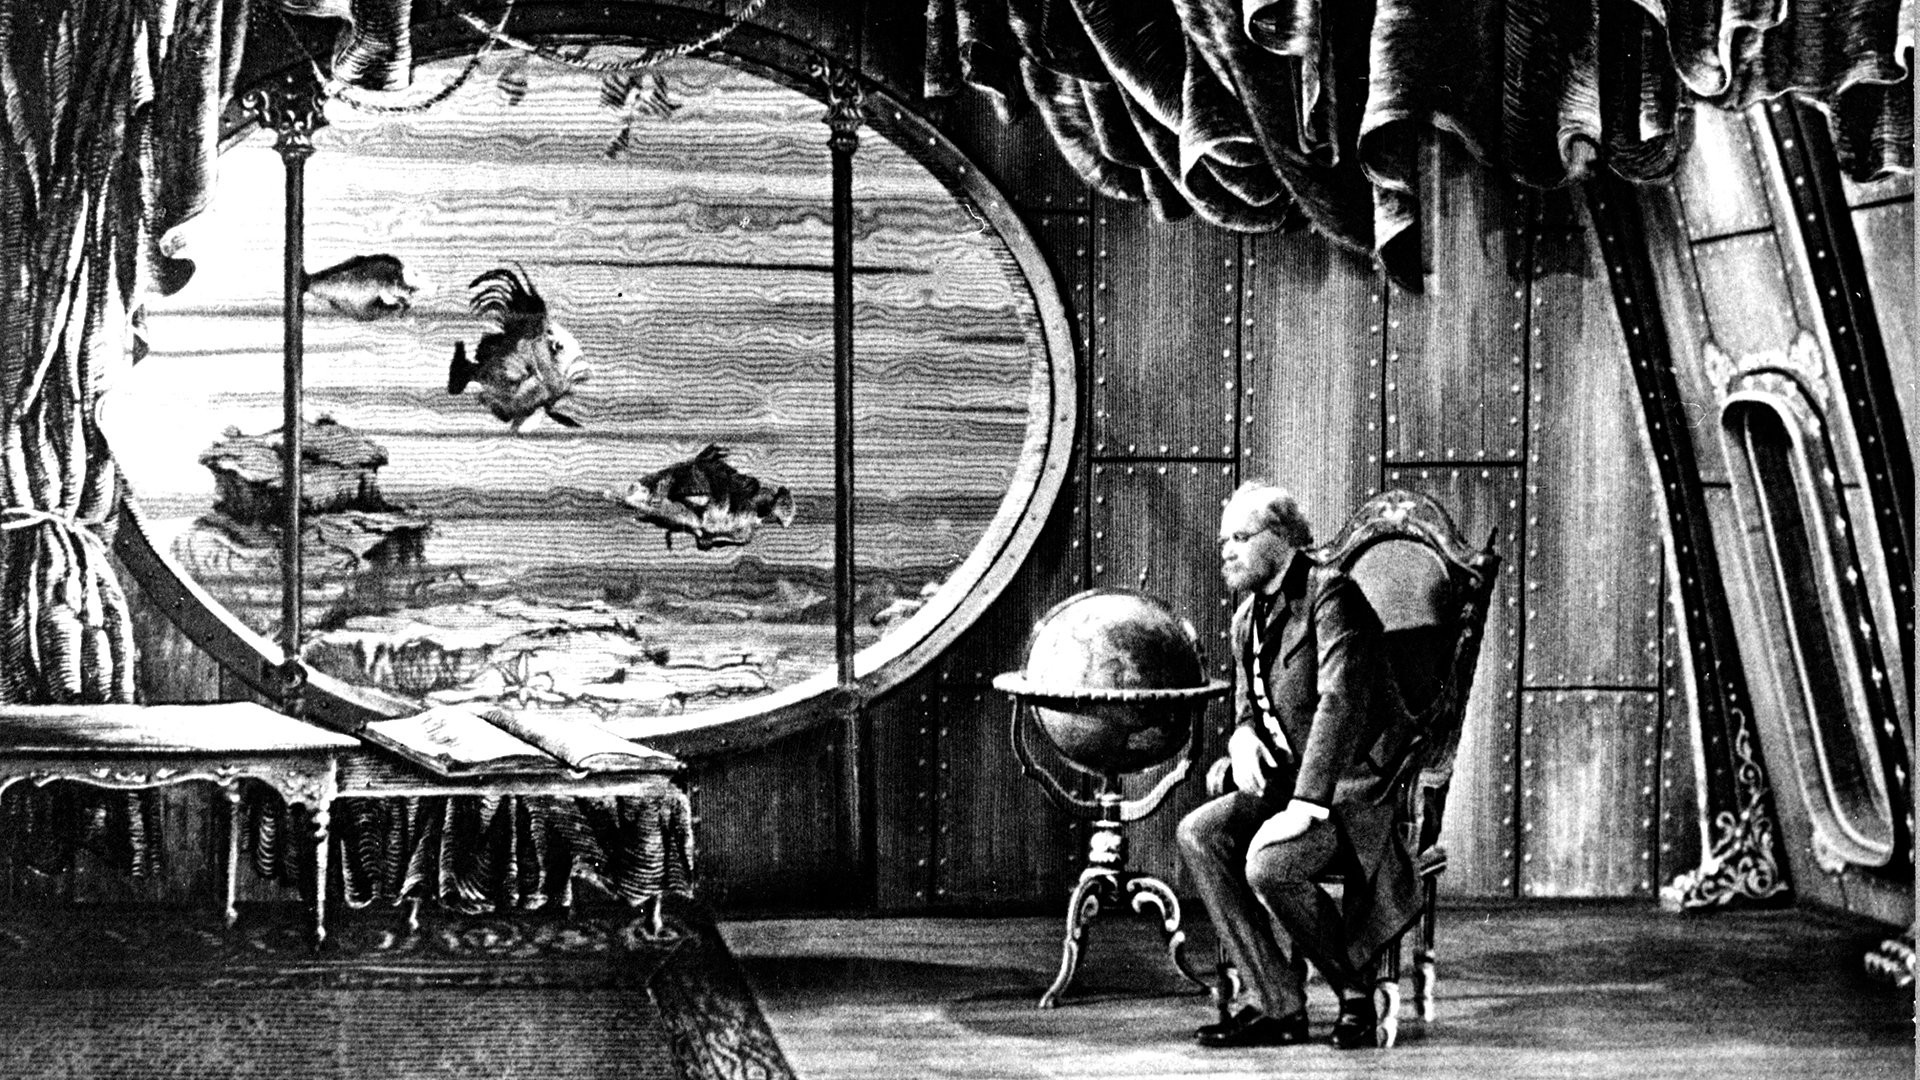 Jules Verne, Old people, Fantasy art, The Fabulous World of Jules Verne, Movies, Monochrome, Vintage, Czech, Submarine, Interior, Underwater, Metal, Window, Fish, Globes, Curtain, Books, Screen shot Wallpaper